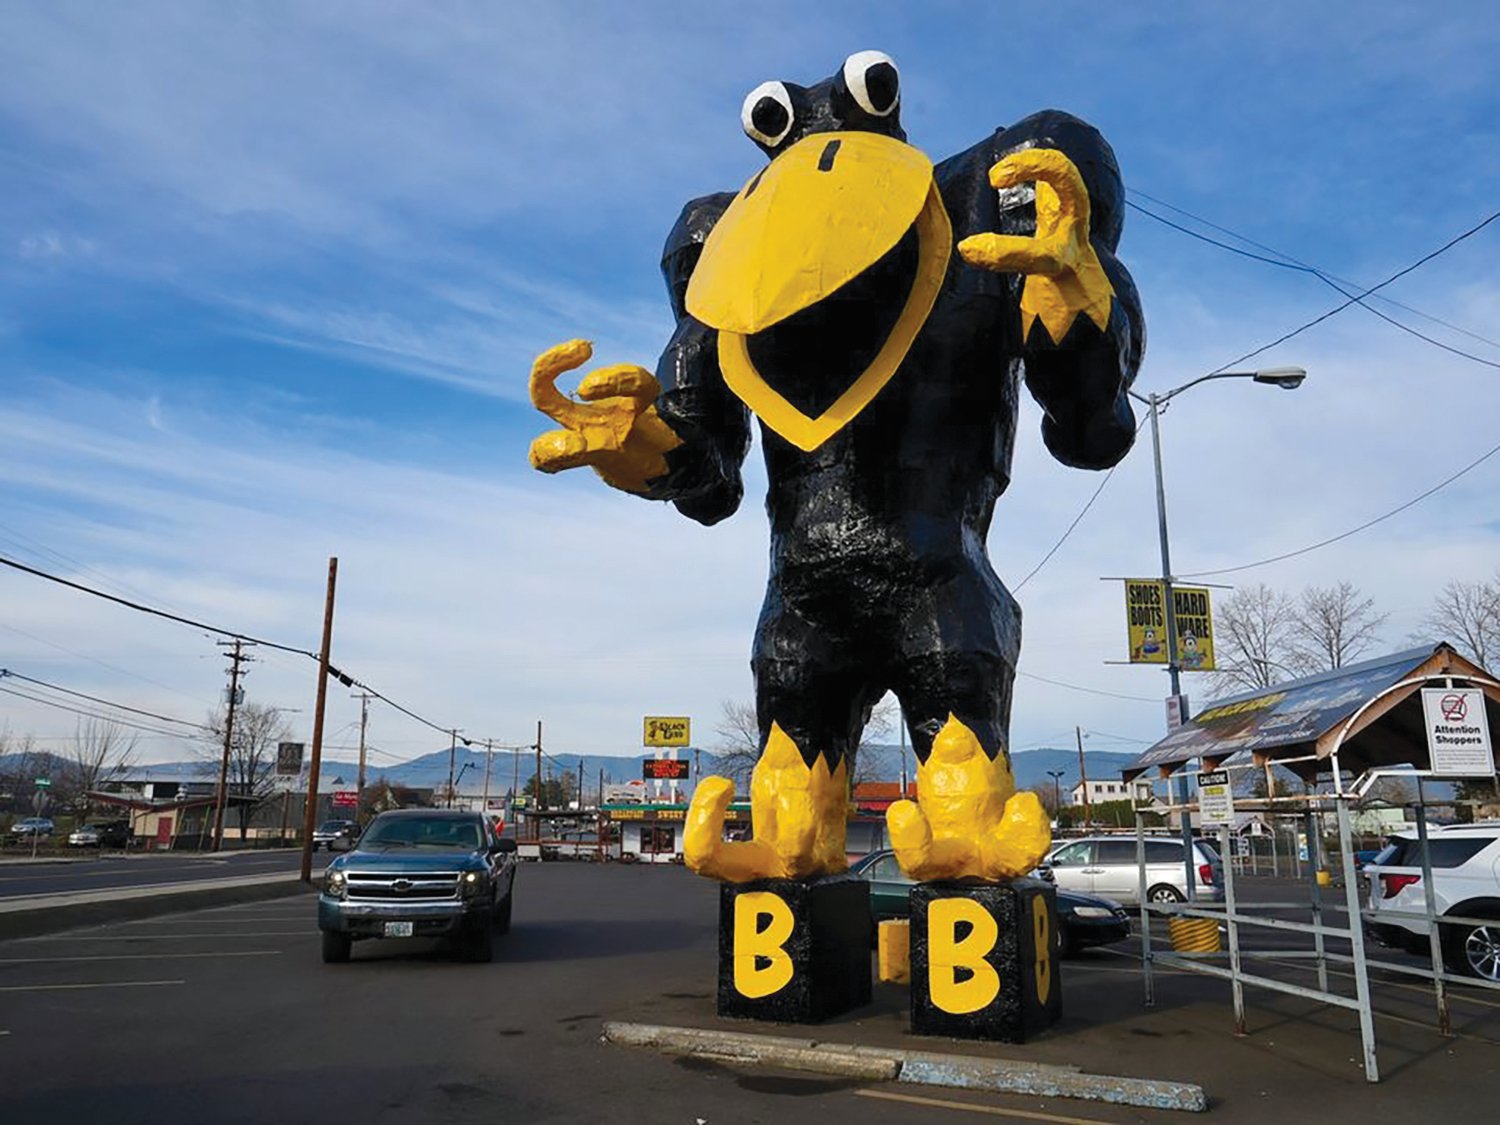 The Black Bird statue, constructed in 1965, sits outside the Black Bird store in Medford.